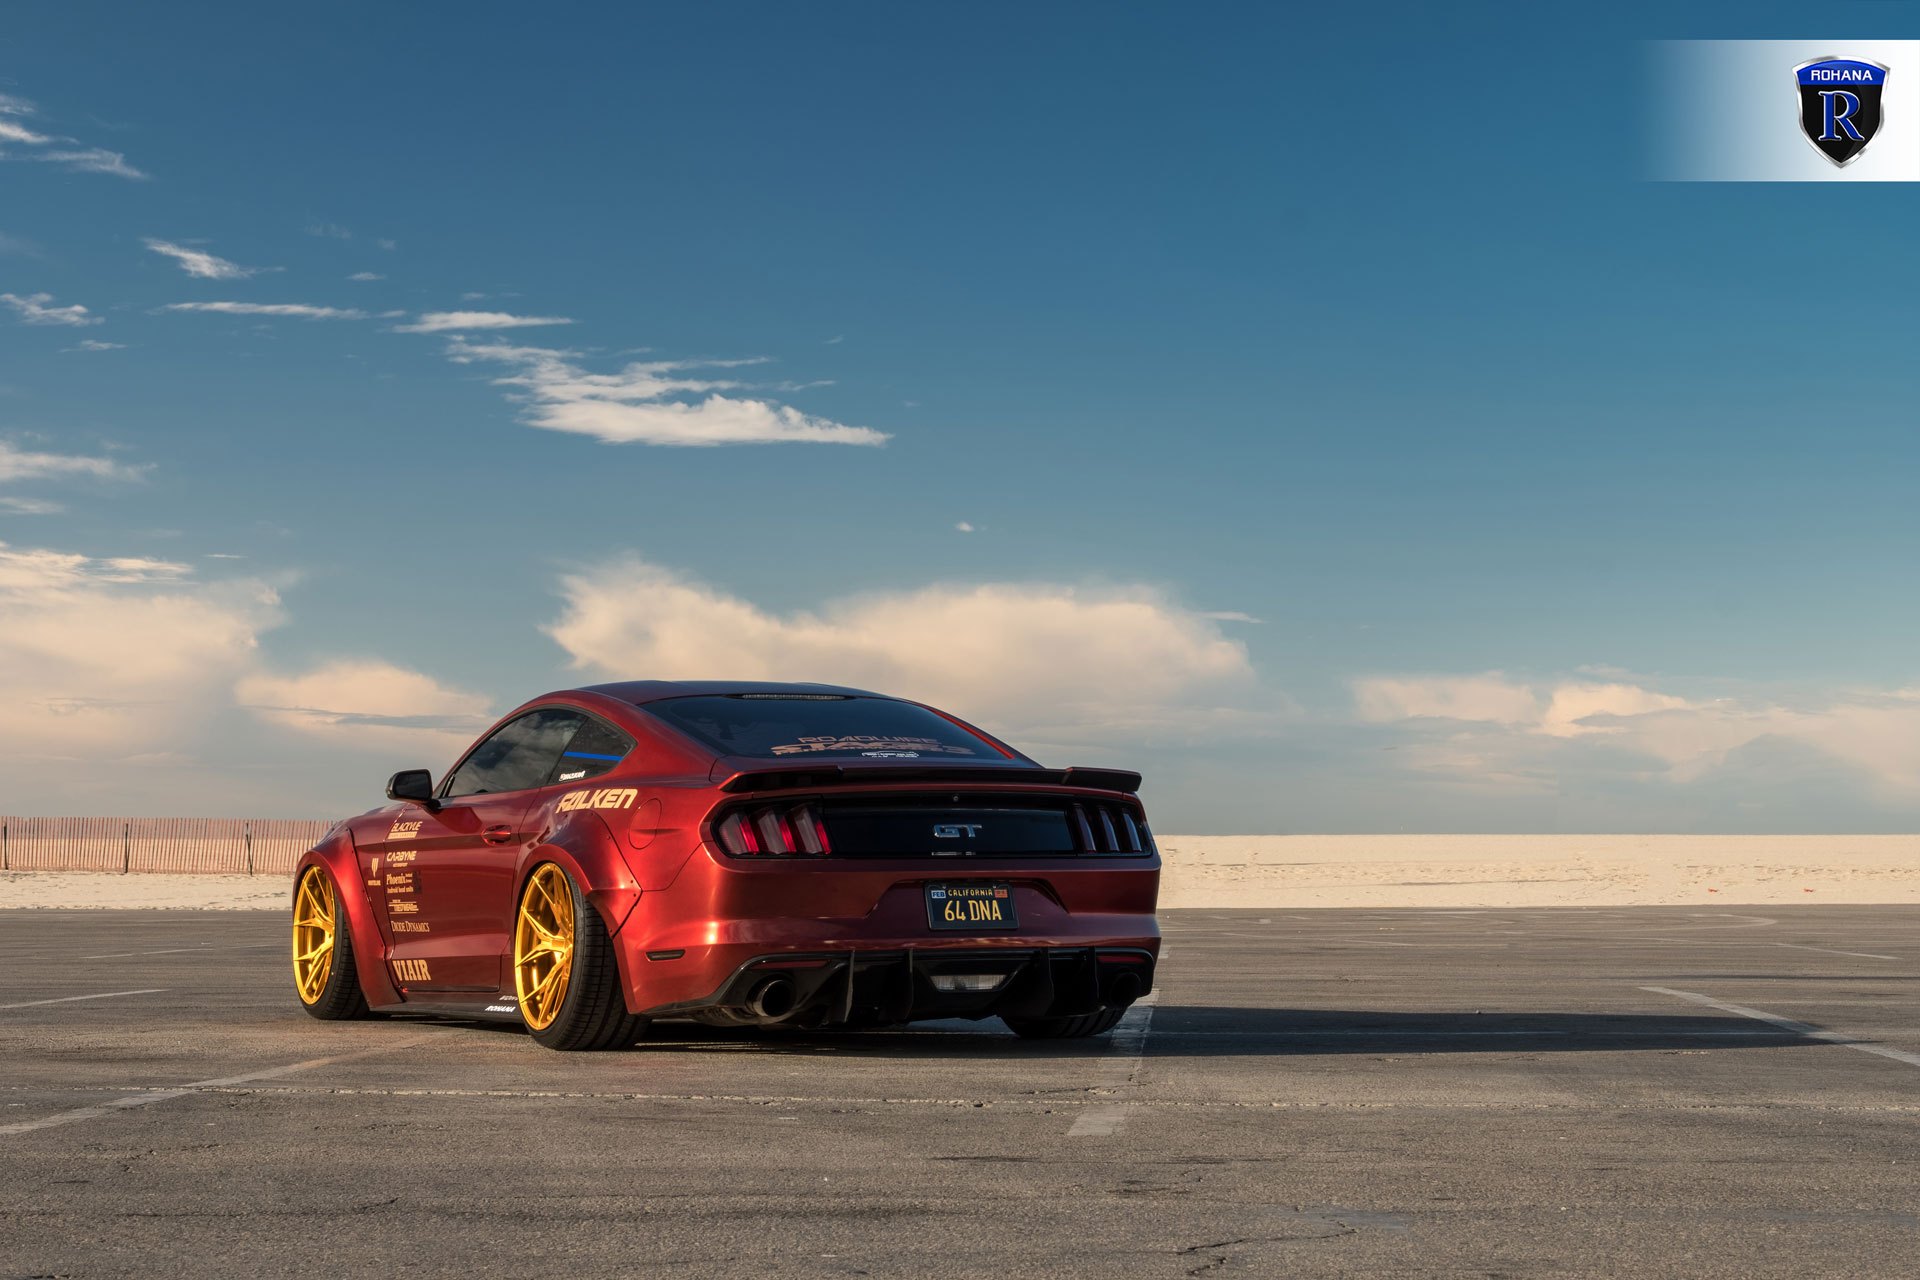 Aftermarket Rear Spoiler on Red Debadged Ford Mustang - Photo by Rohana Wheels